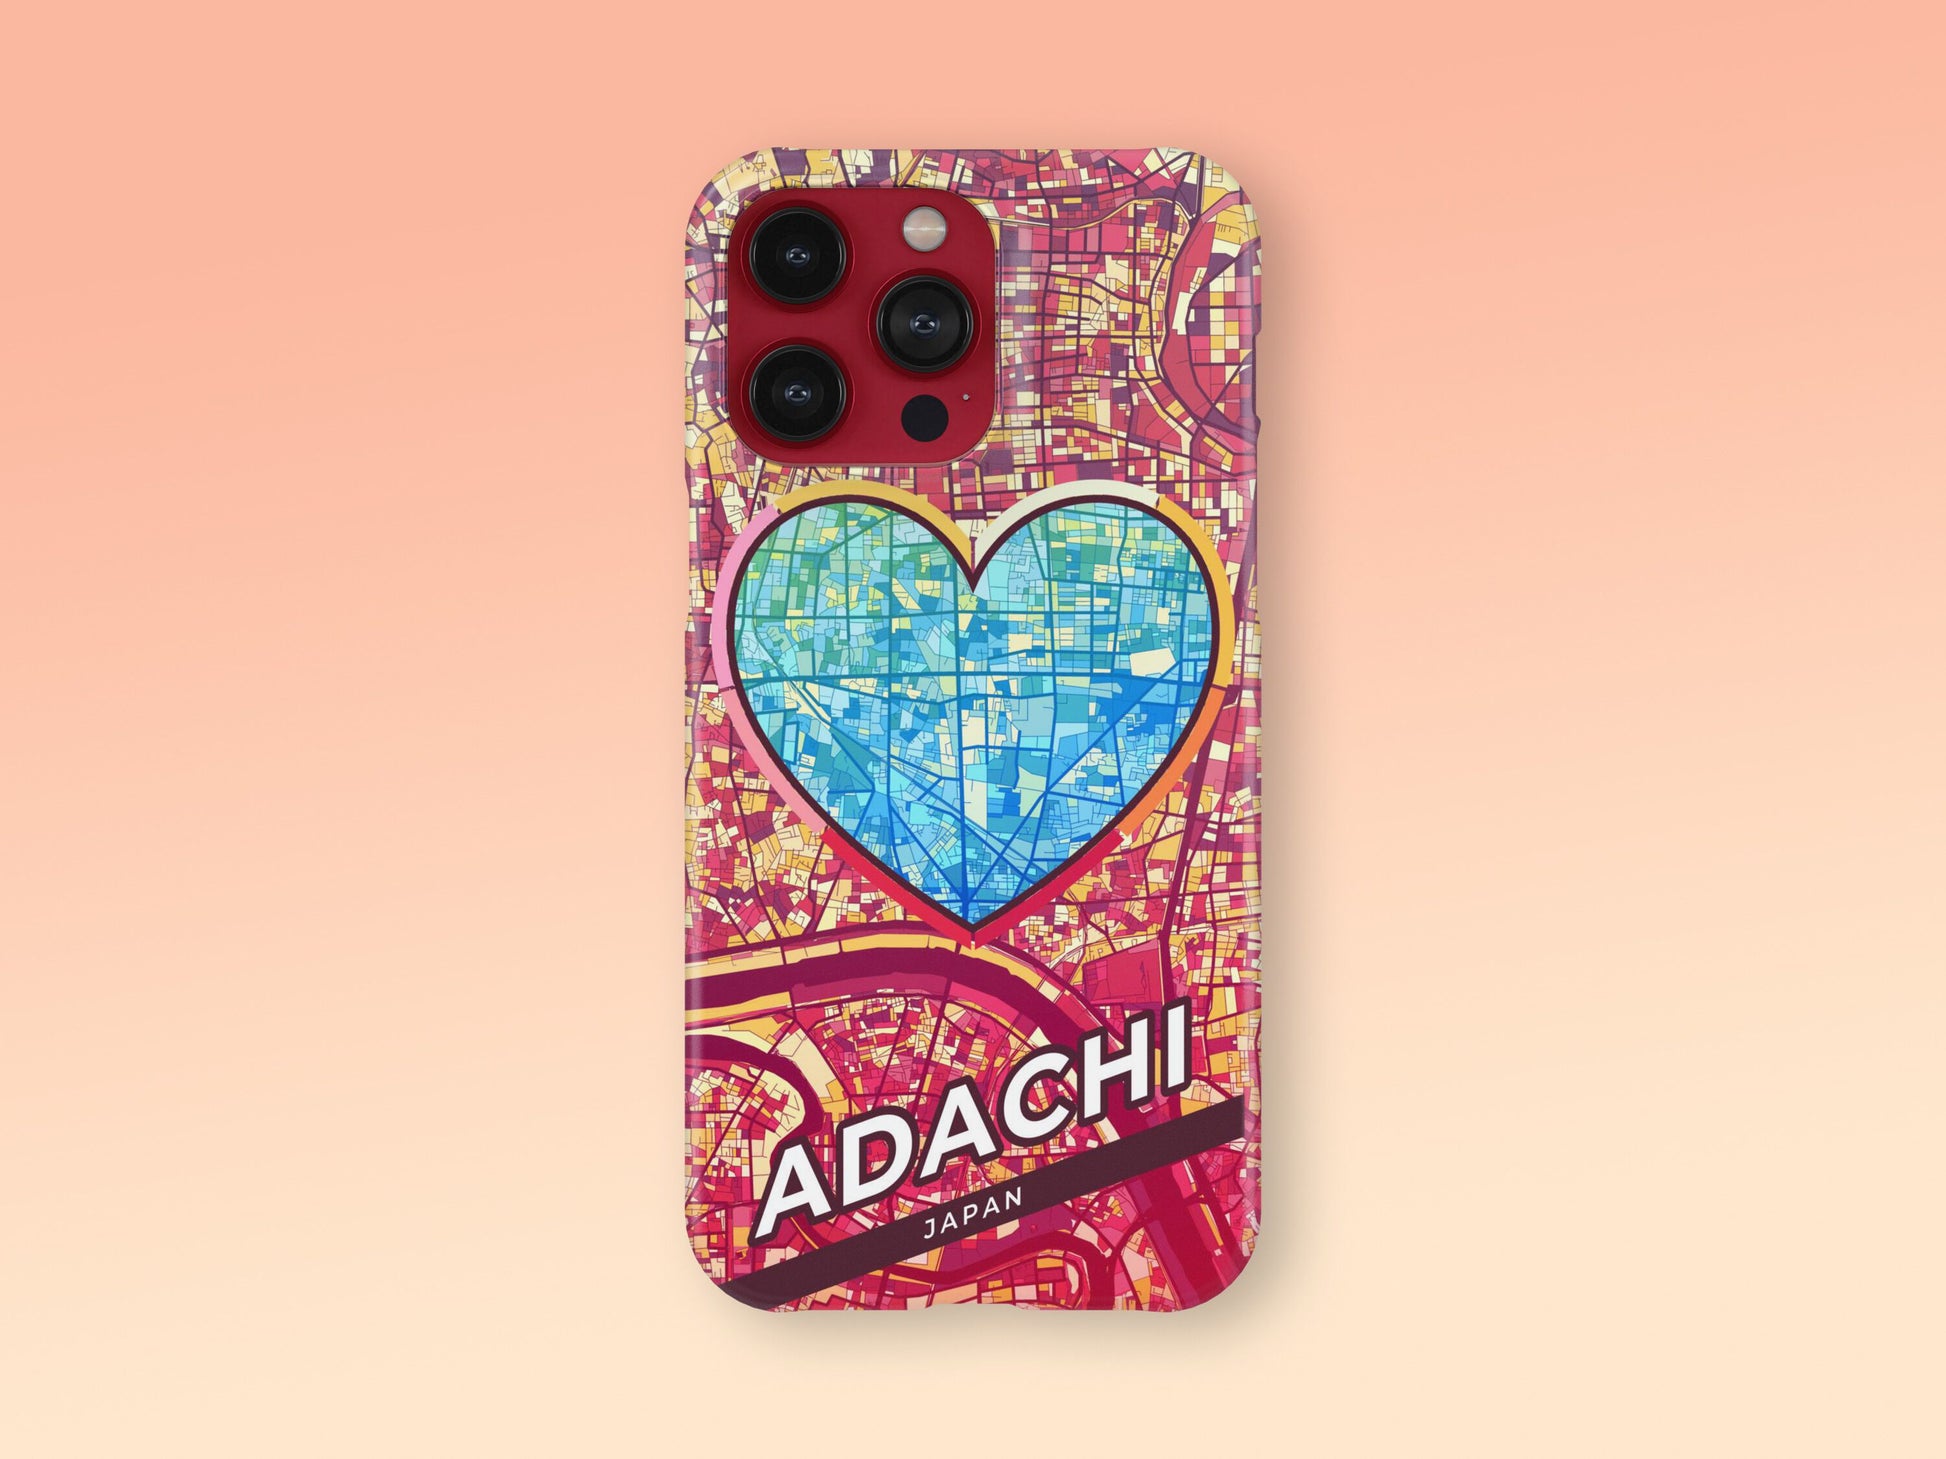 Adachi Japan slim phone case with colorful icon. Birthday, wedding or housewarming gift. Couple match cases. 2